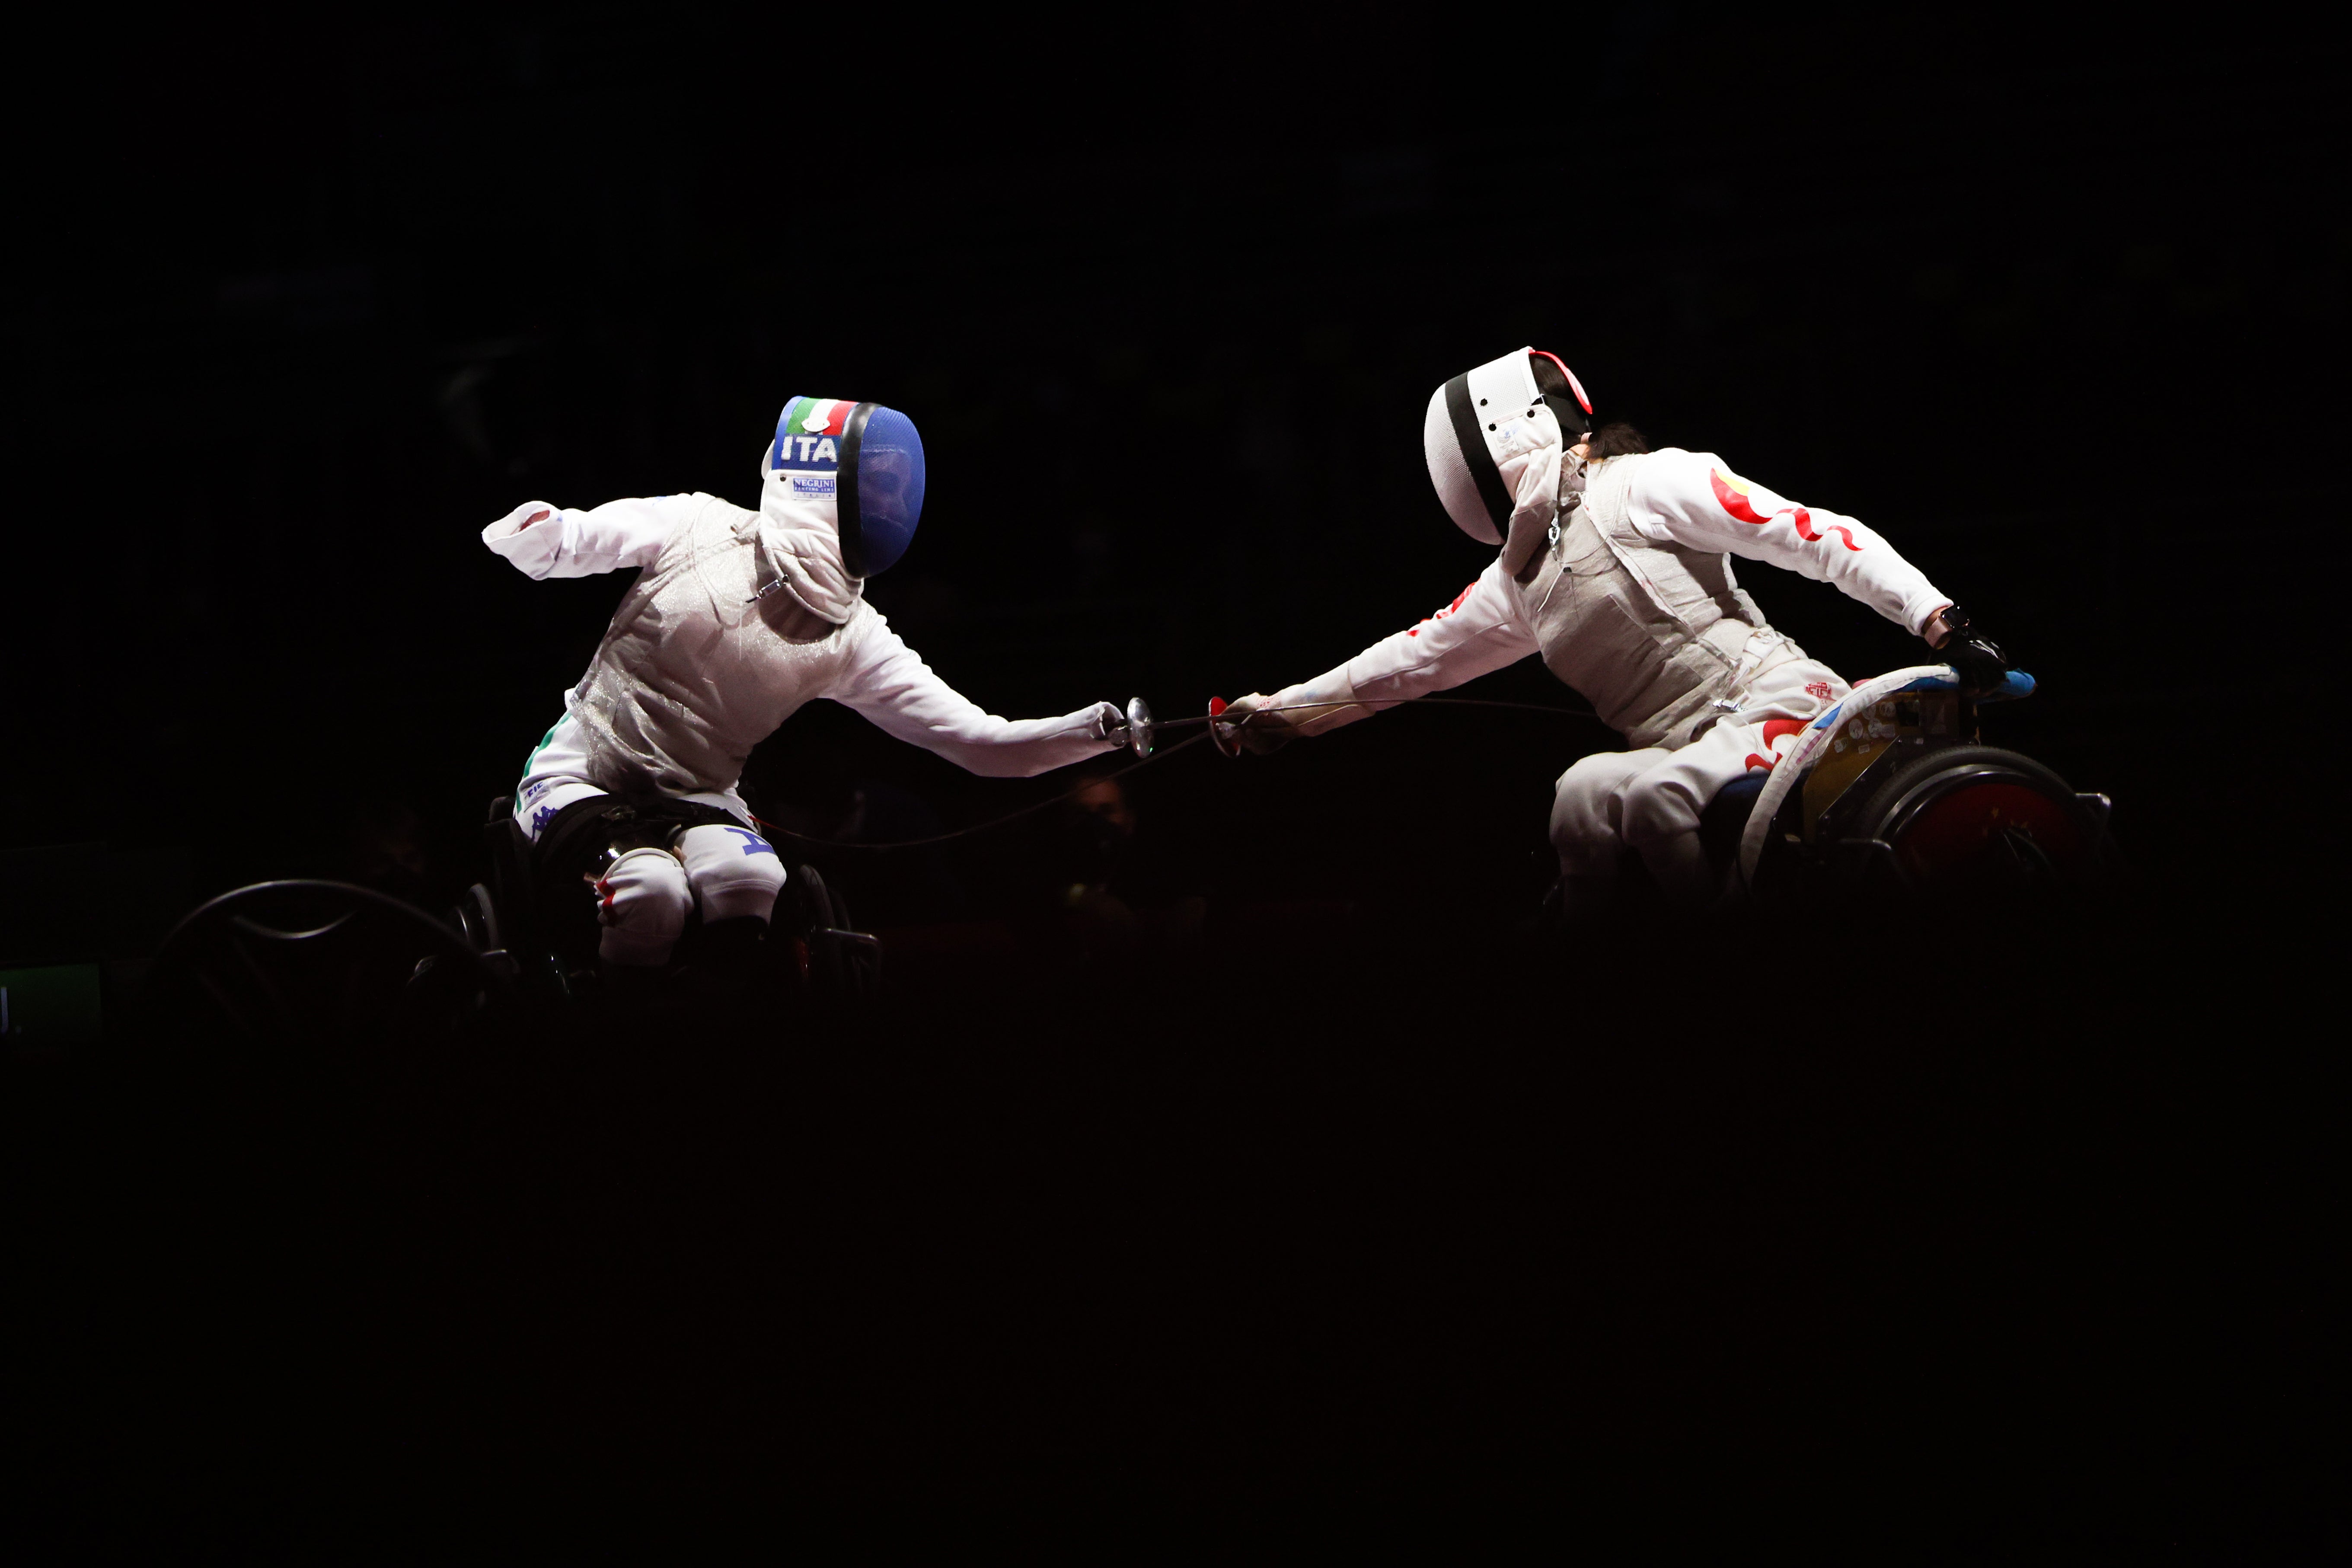 Chaves is hoping to compete in fencing at a third Paralympics